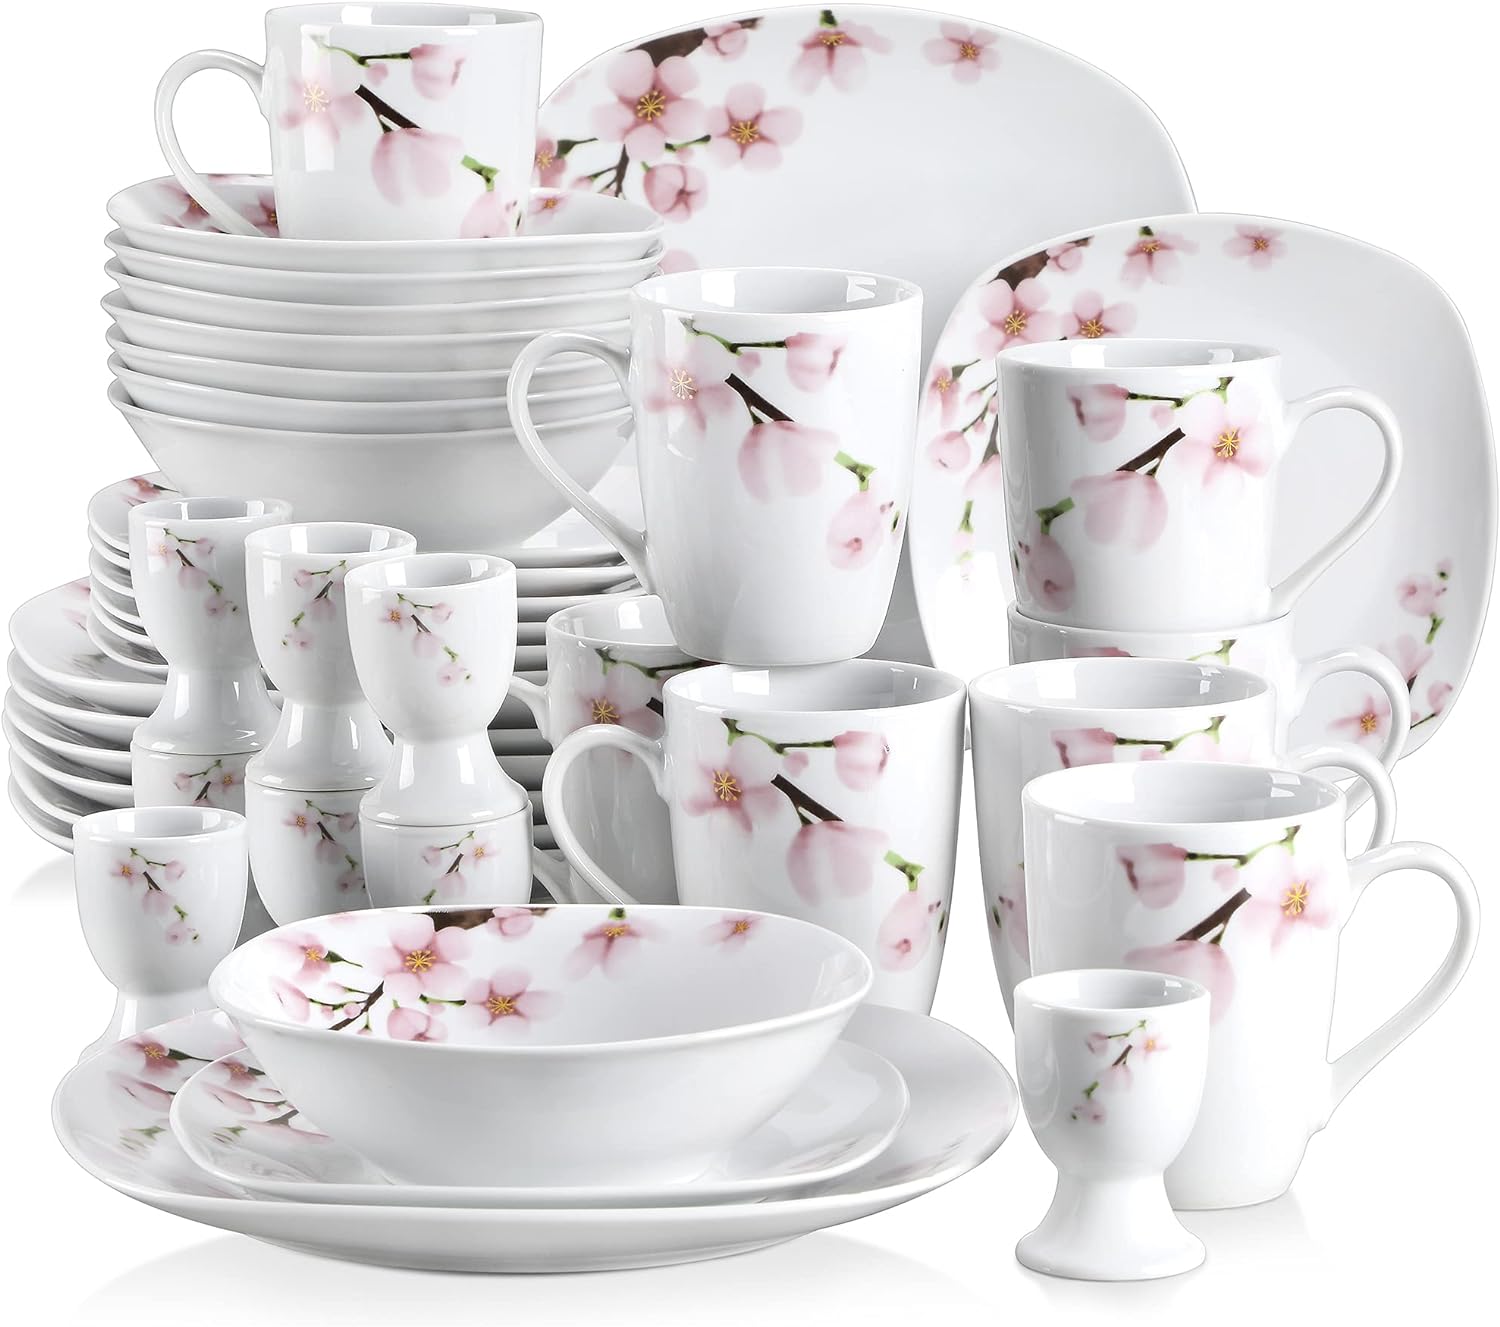 I love this set. I love cherry blossoms and it' sturdy and easy to clean. The only thing I would say is that the bowls are not deep enough and the cups are really small, but they're really cute though! It' a nice set, especially for collage or living with yourself or roommate. My little ones use the small plates and cups though, so it' perfect for them as well!